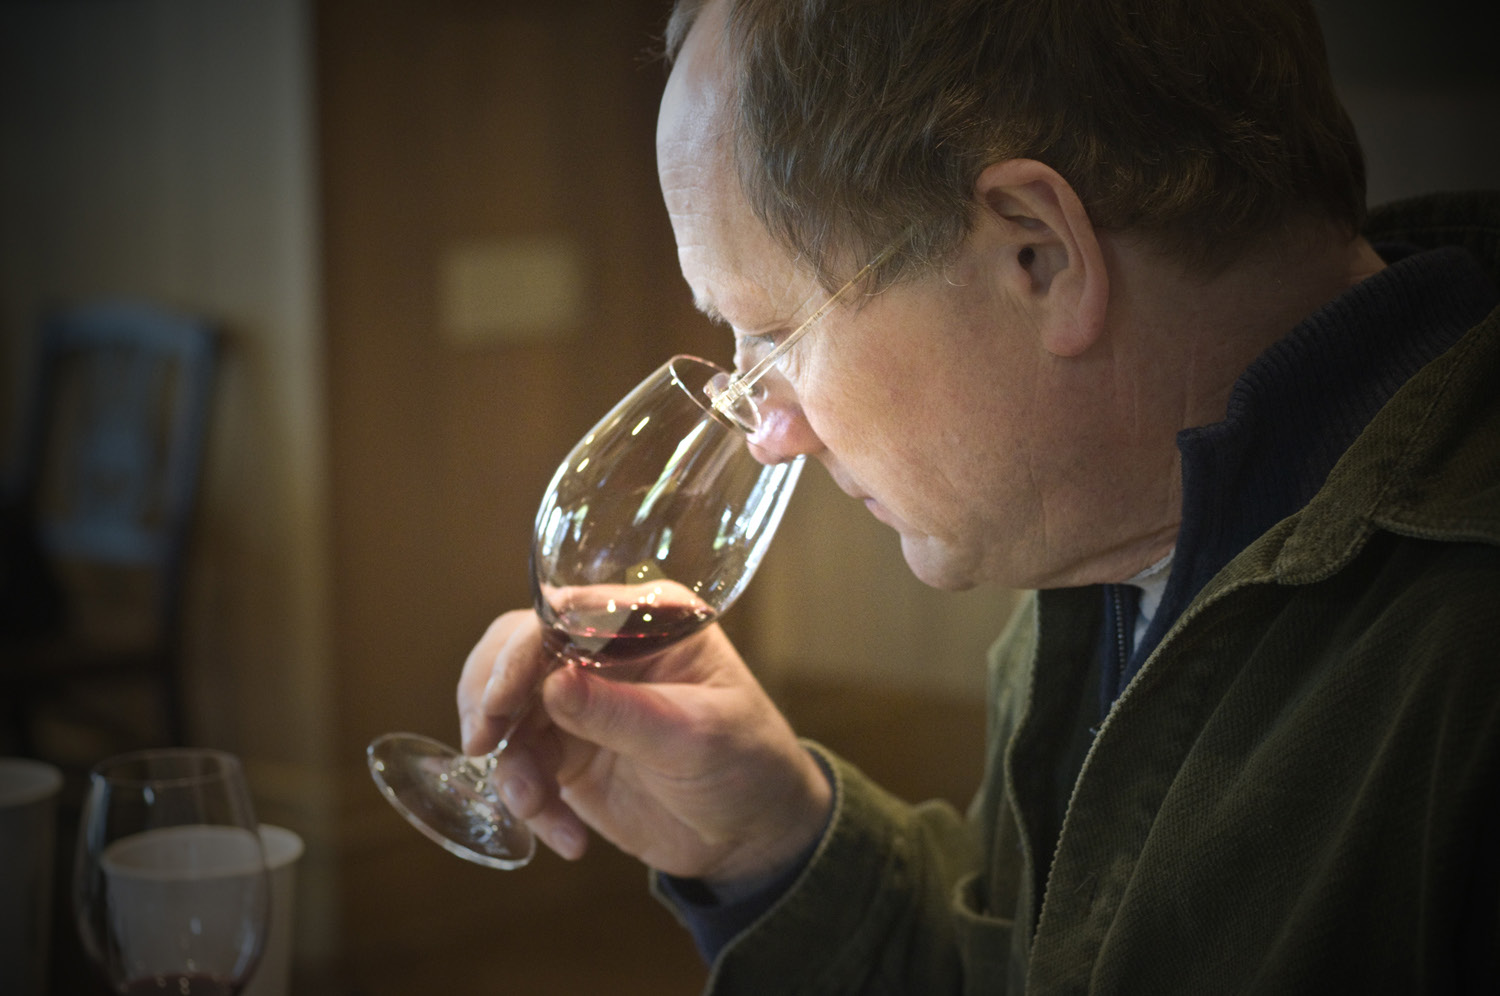 Chris Howell speaks with Forbes about tannins in wine